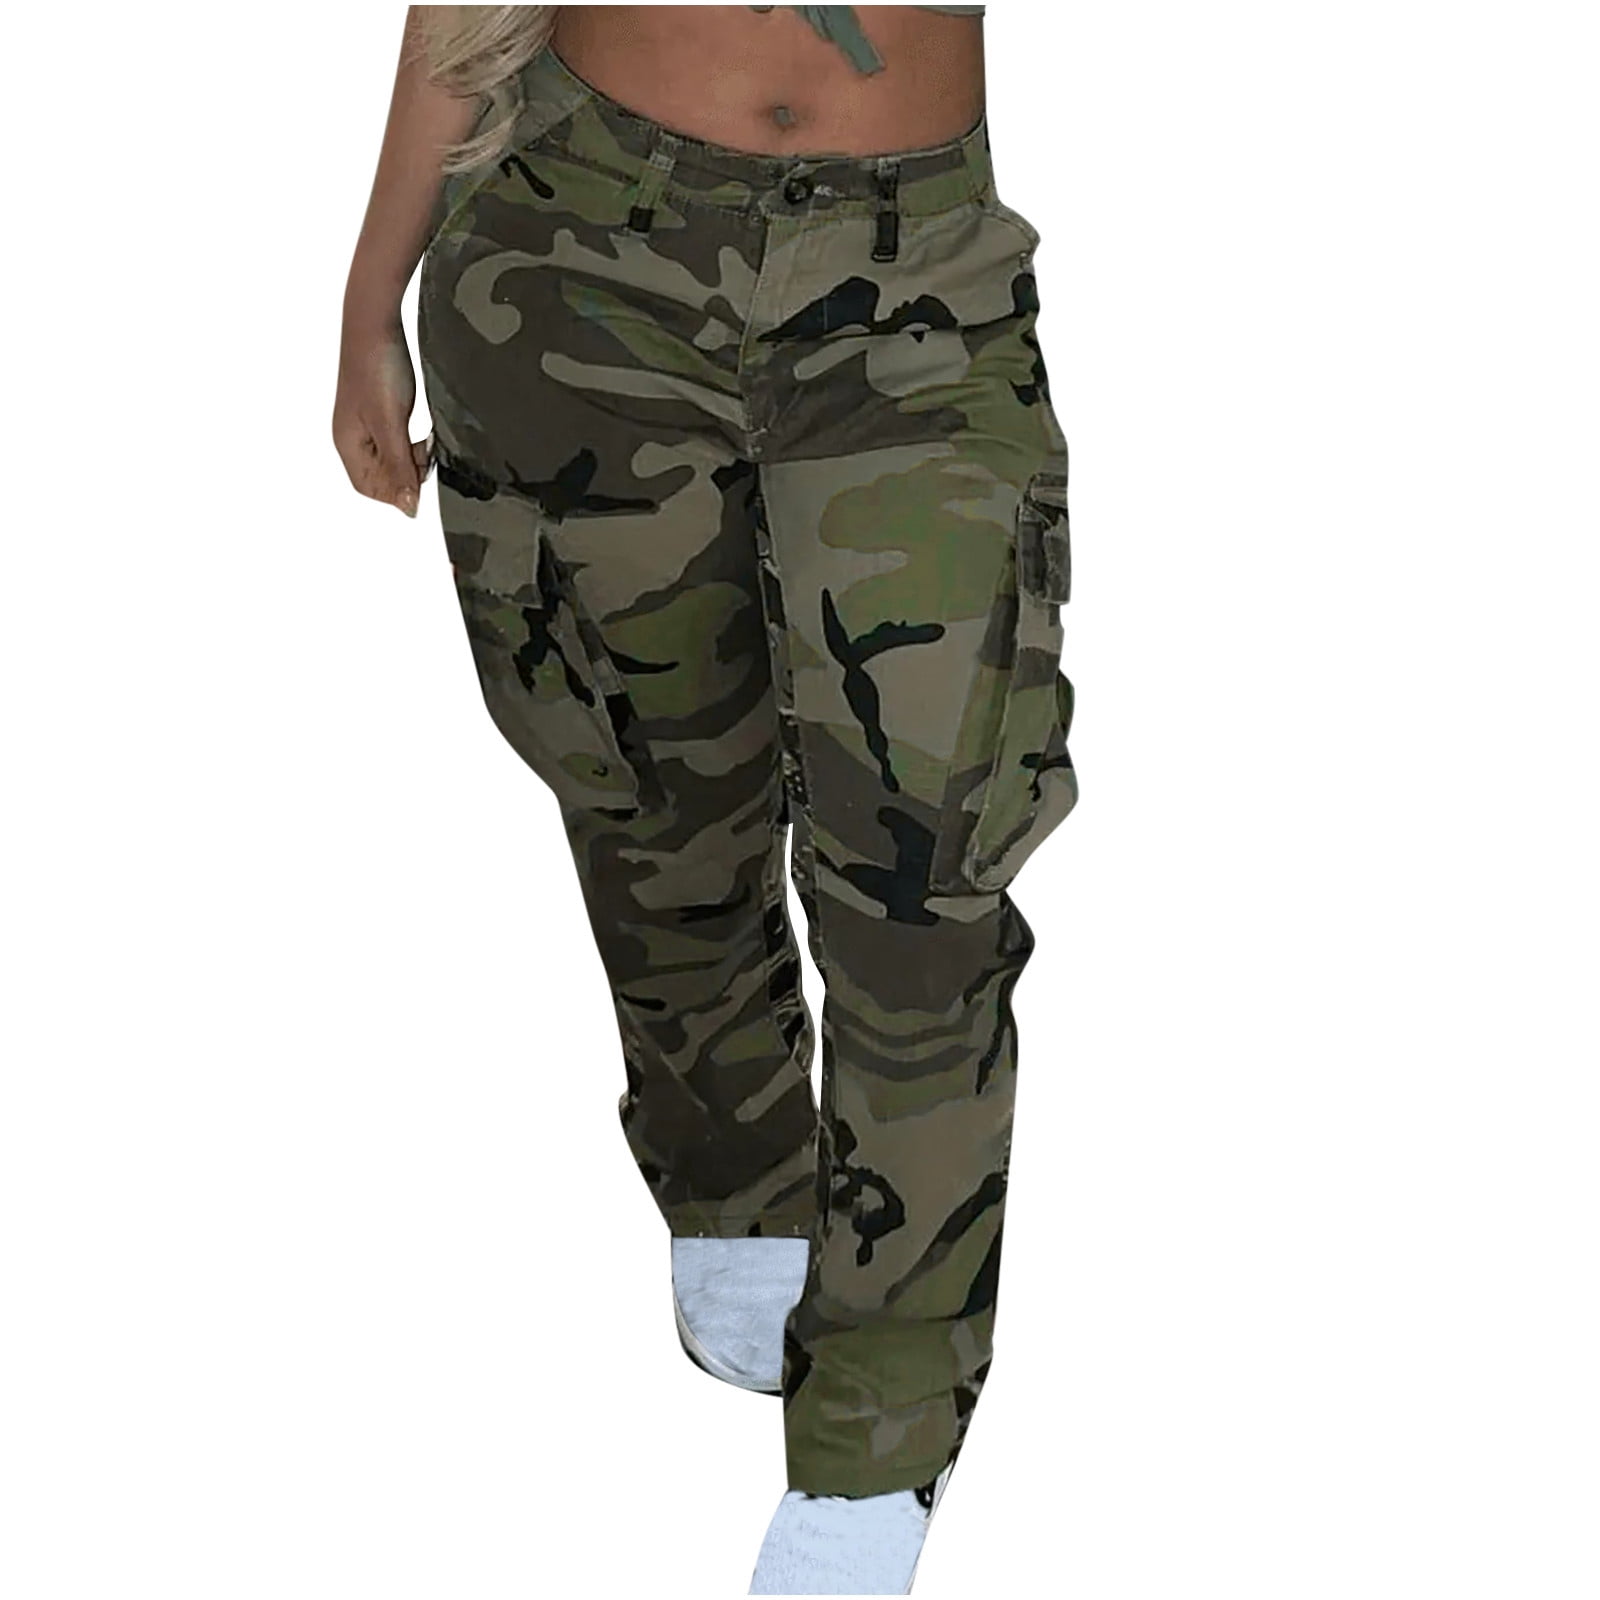 Buy Knot Front Camo Print Cargo Pants in the online store - BigShopStyle | Camo  pants outfit, Camo outfits, Camo fashion